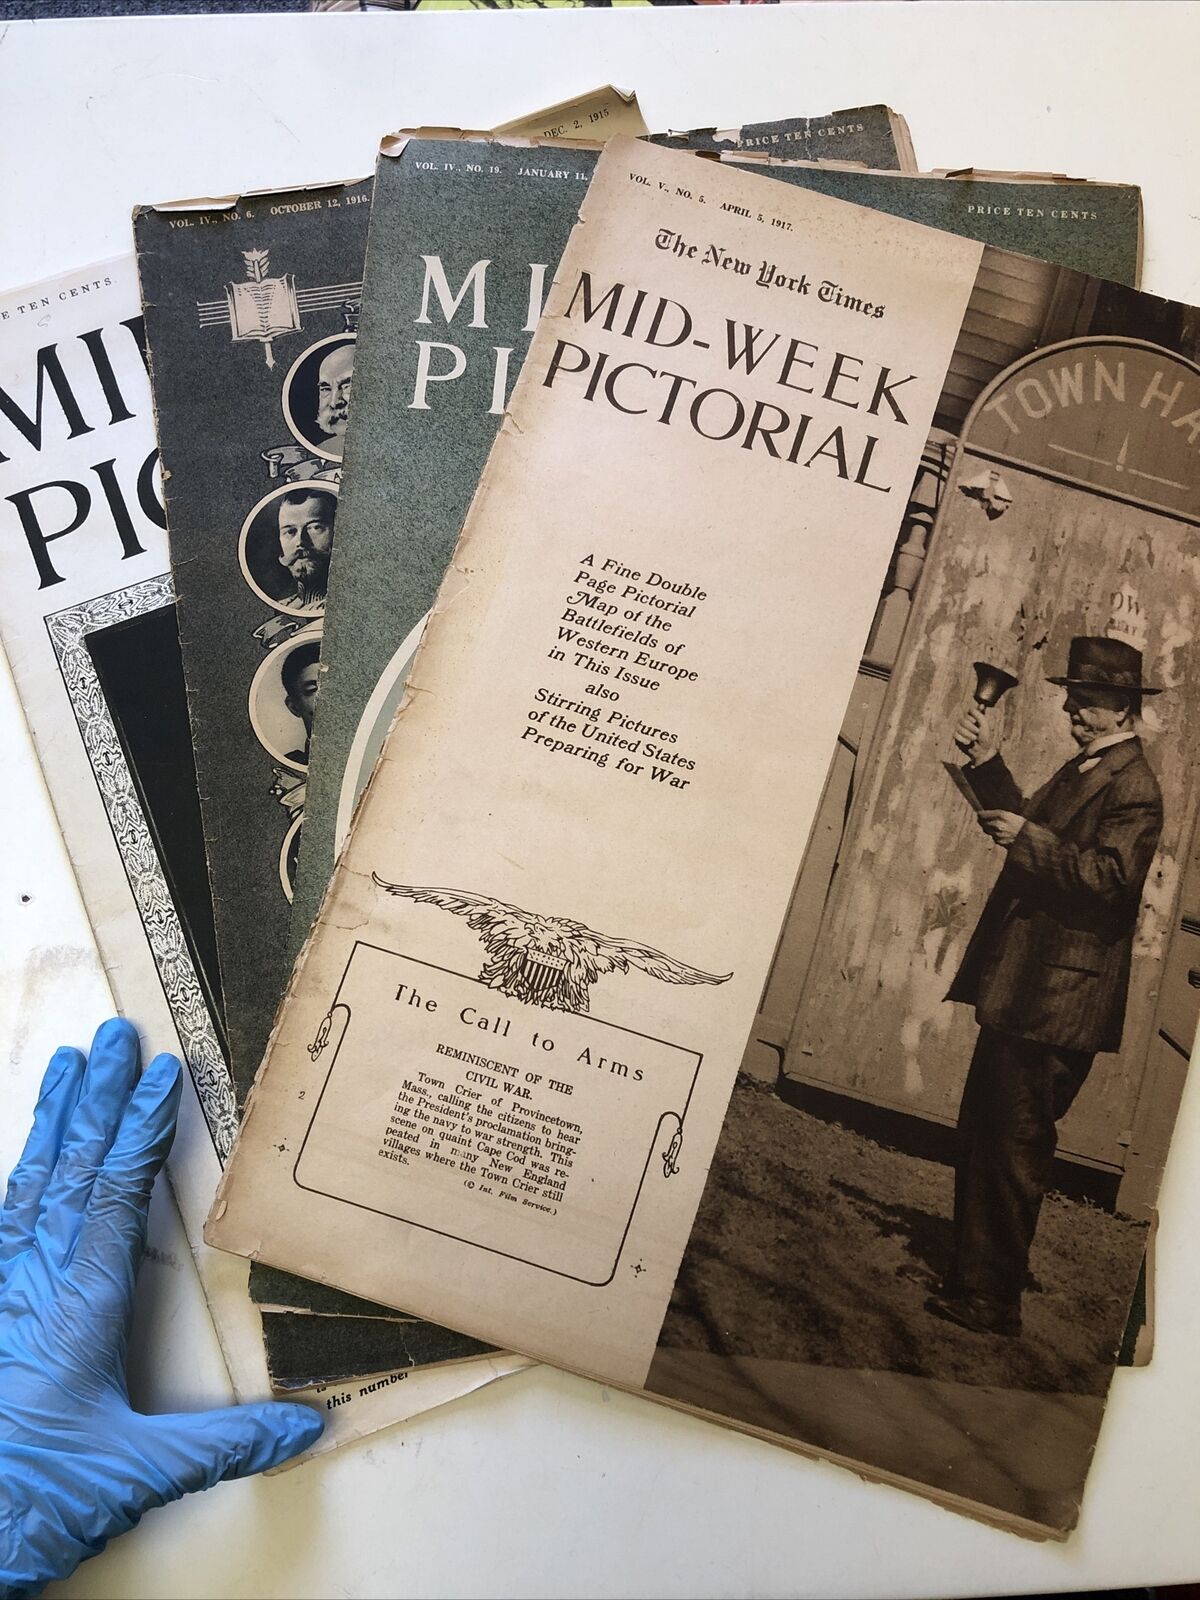 Lot 4: NEW YORK TIMES MID WEEK PICTORIAL MAGAZINE 1915-1917 WWI WAR NEWS PHOTOS